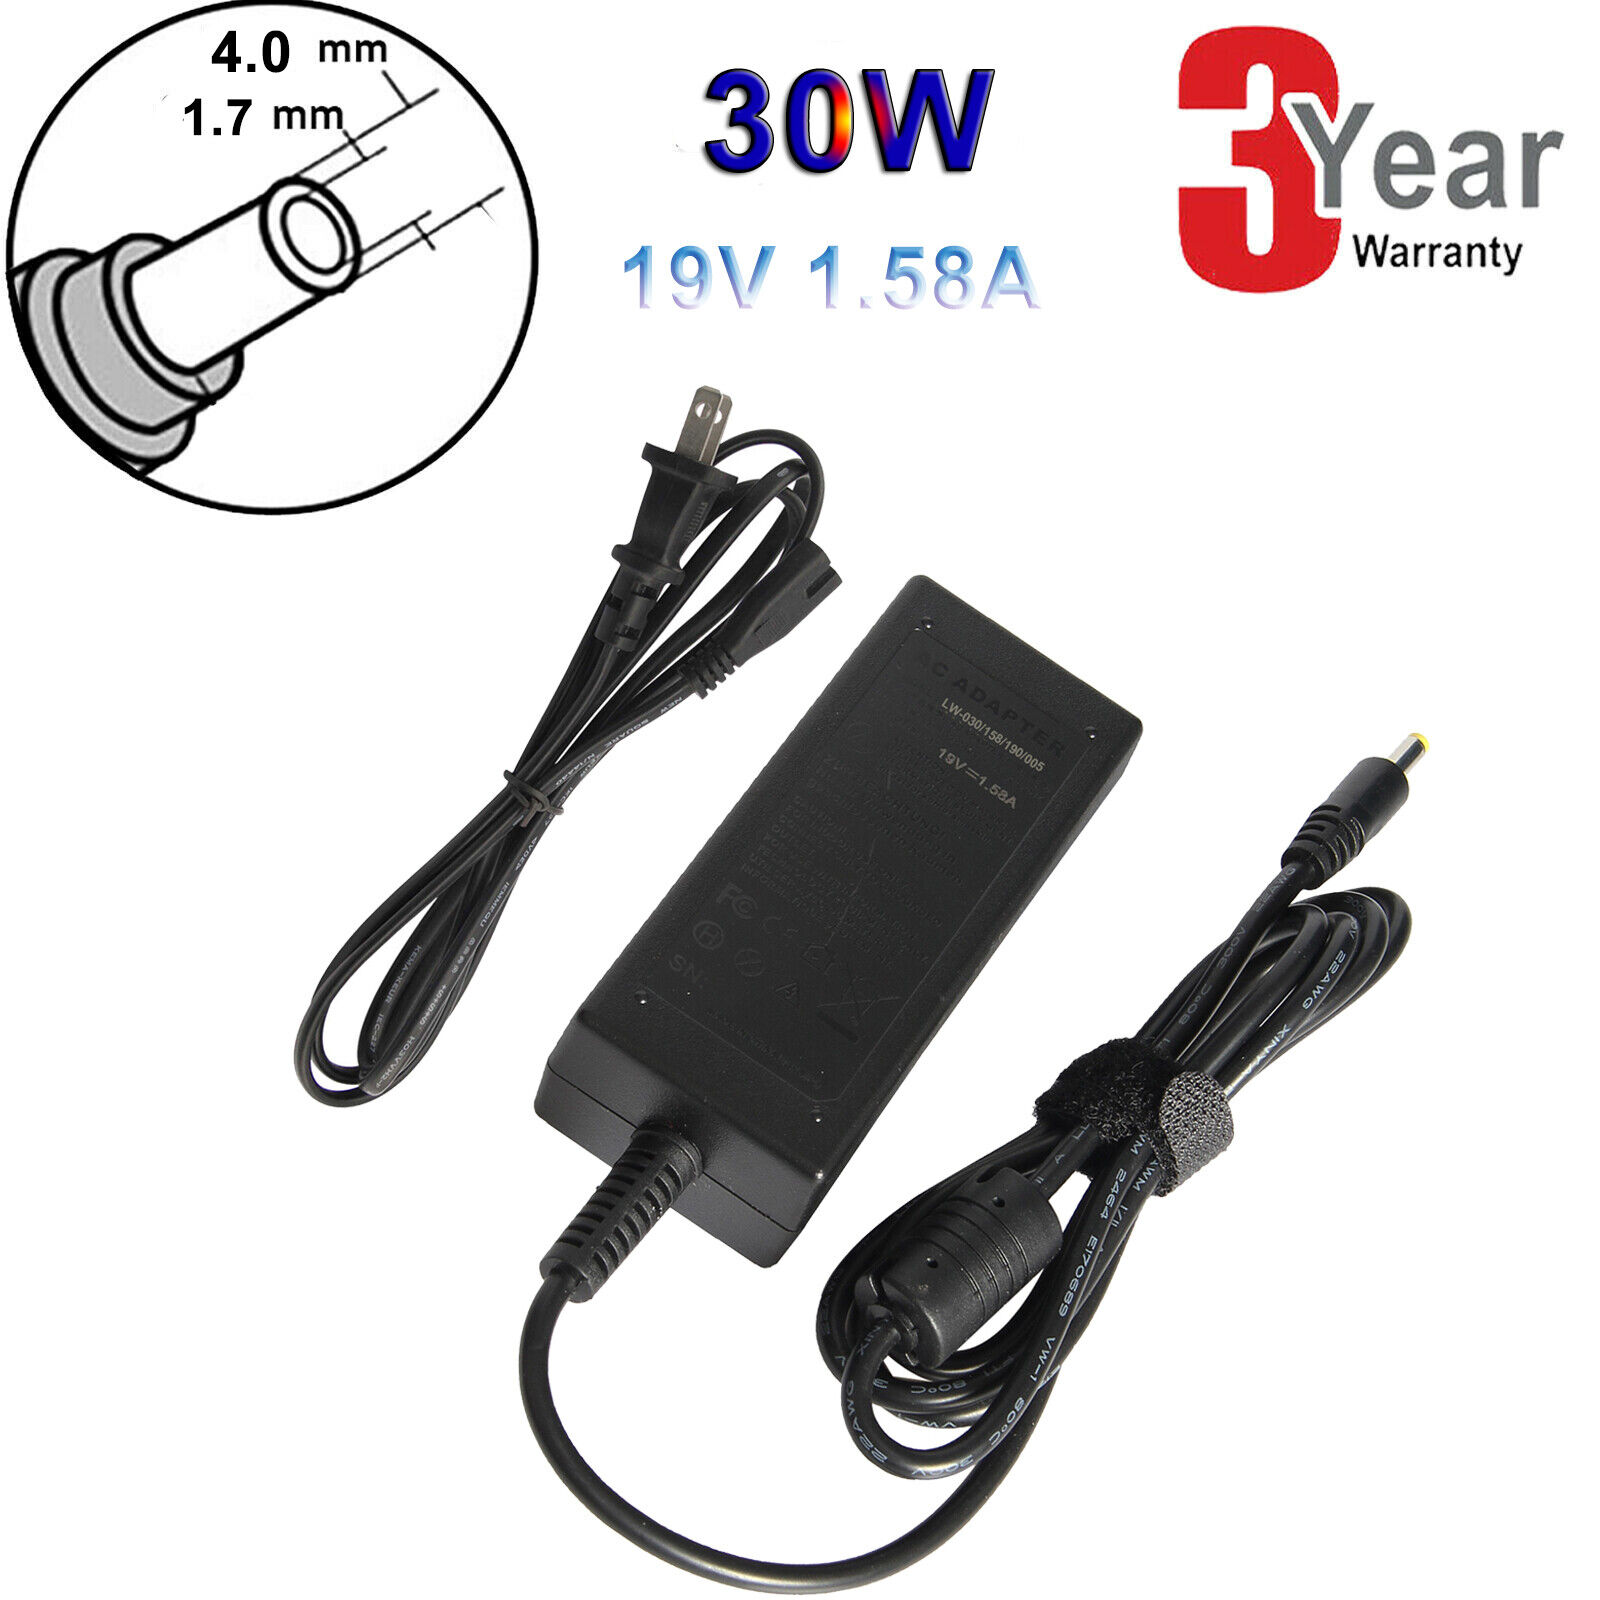 AC Adapter Charger For Toshiba Thrive Tablet PC AT105-T1016 AT105-T10162 US